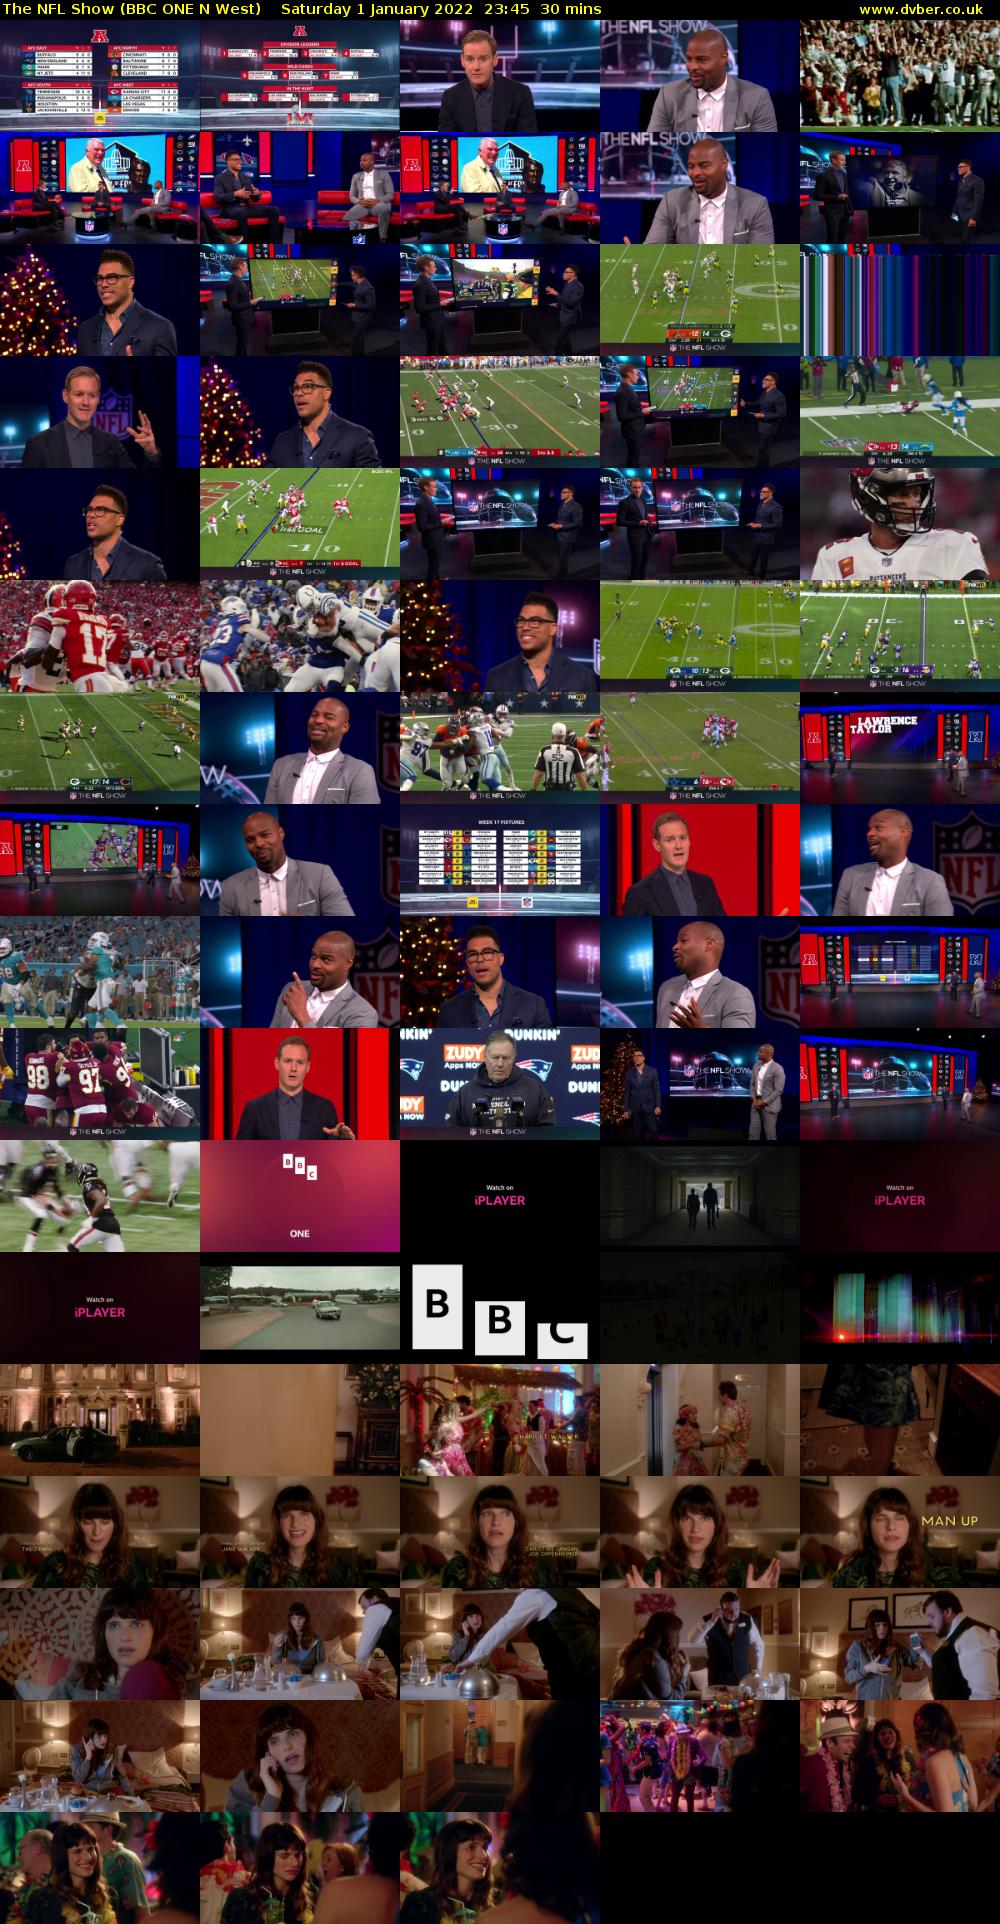 The NFL Show (BBC ONE N West) Saturday 1 January 2022 23:45 - 00:15